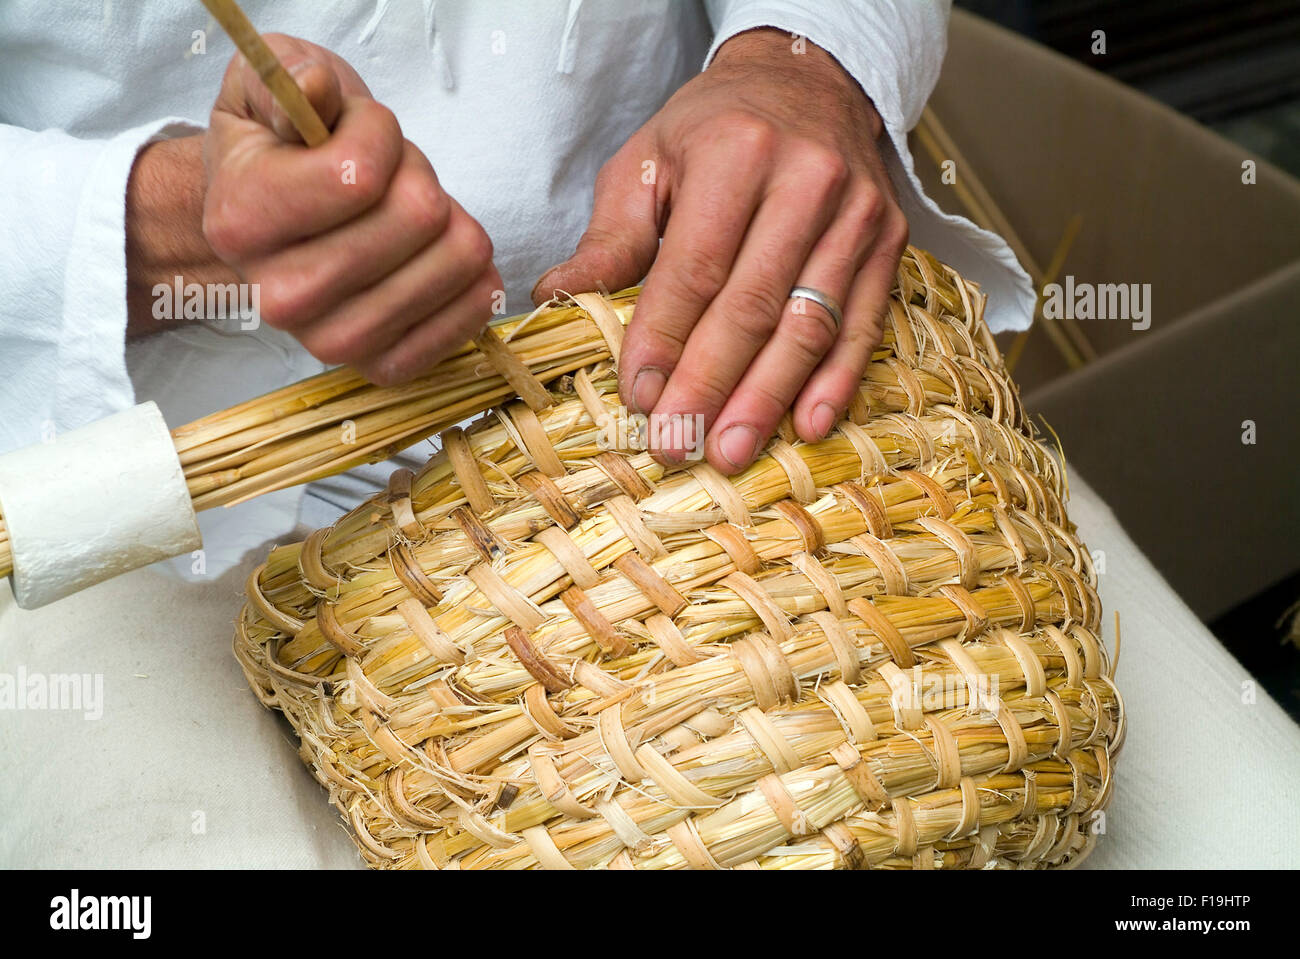 Beekeeper is building a historic beehive Stock Photo